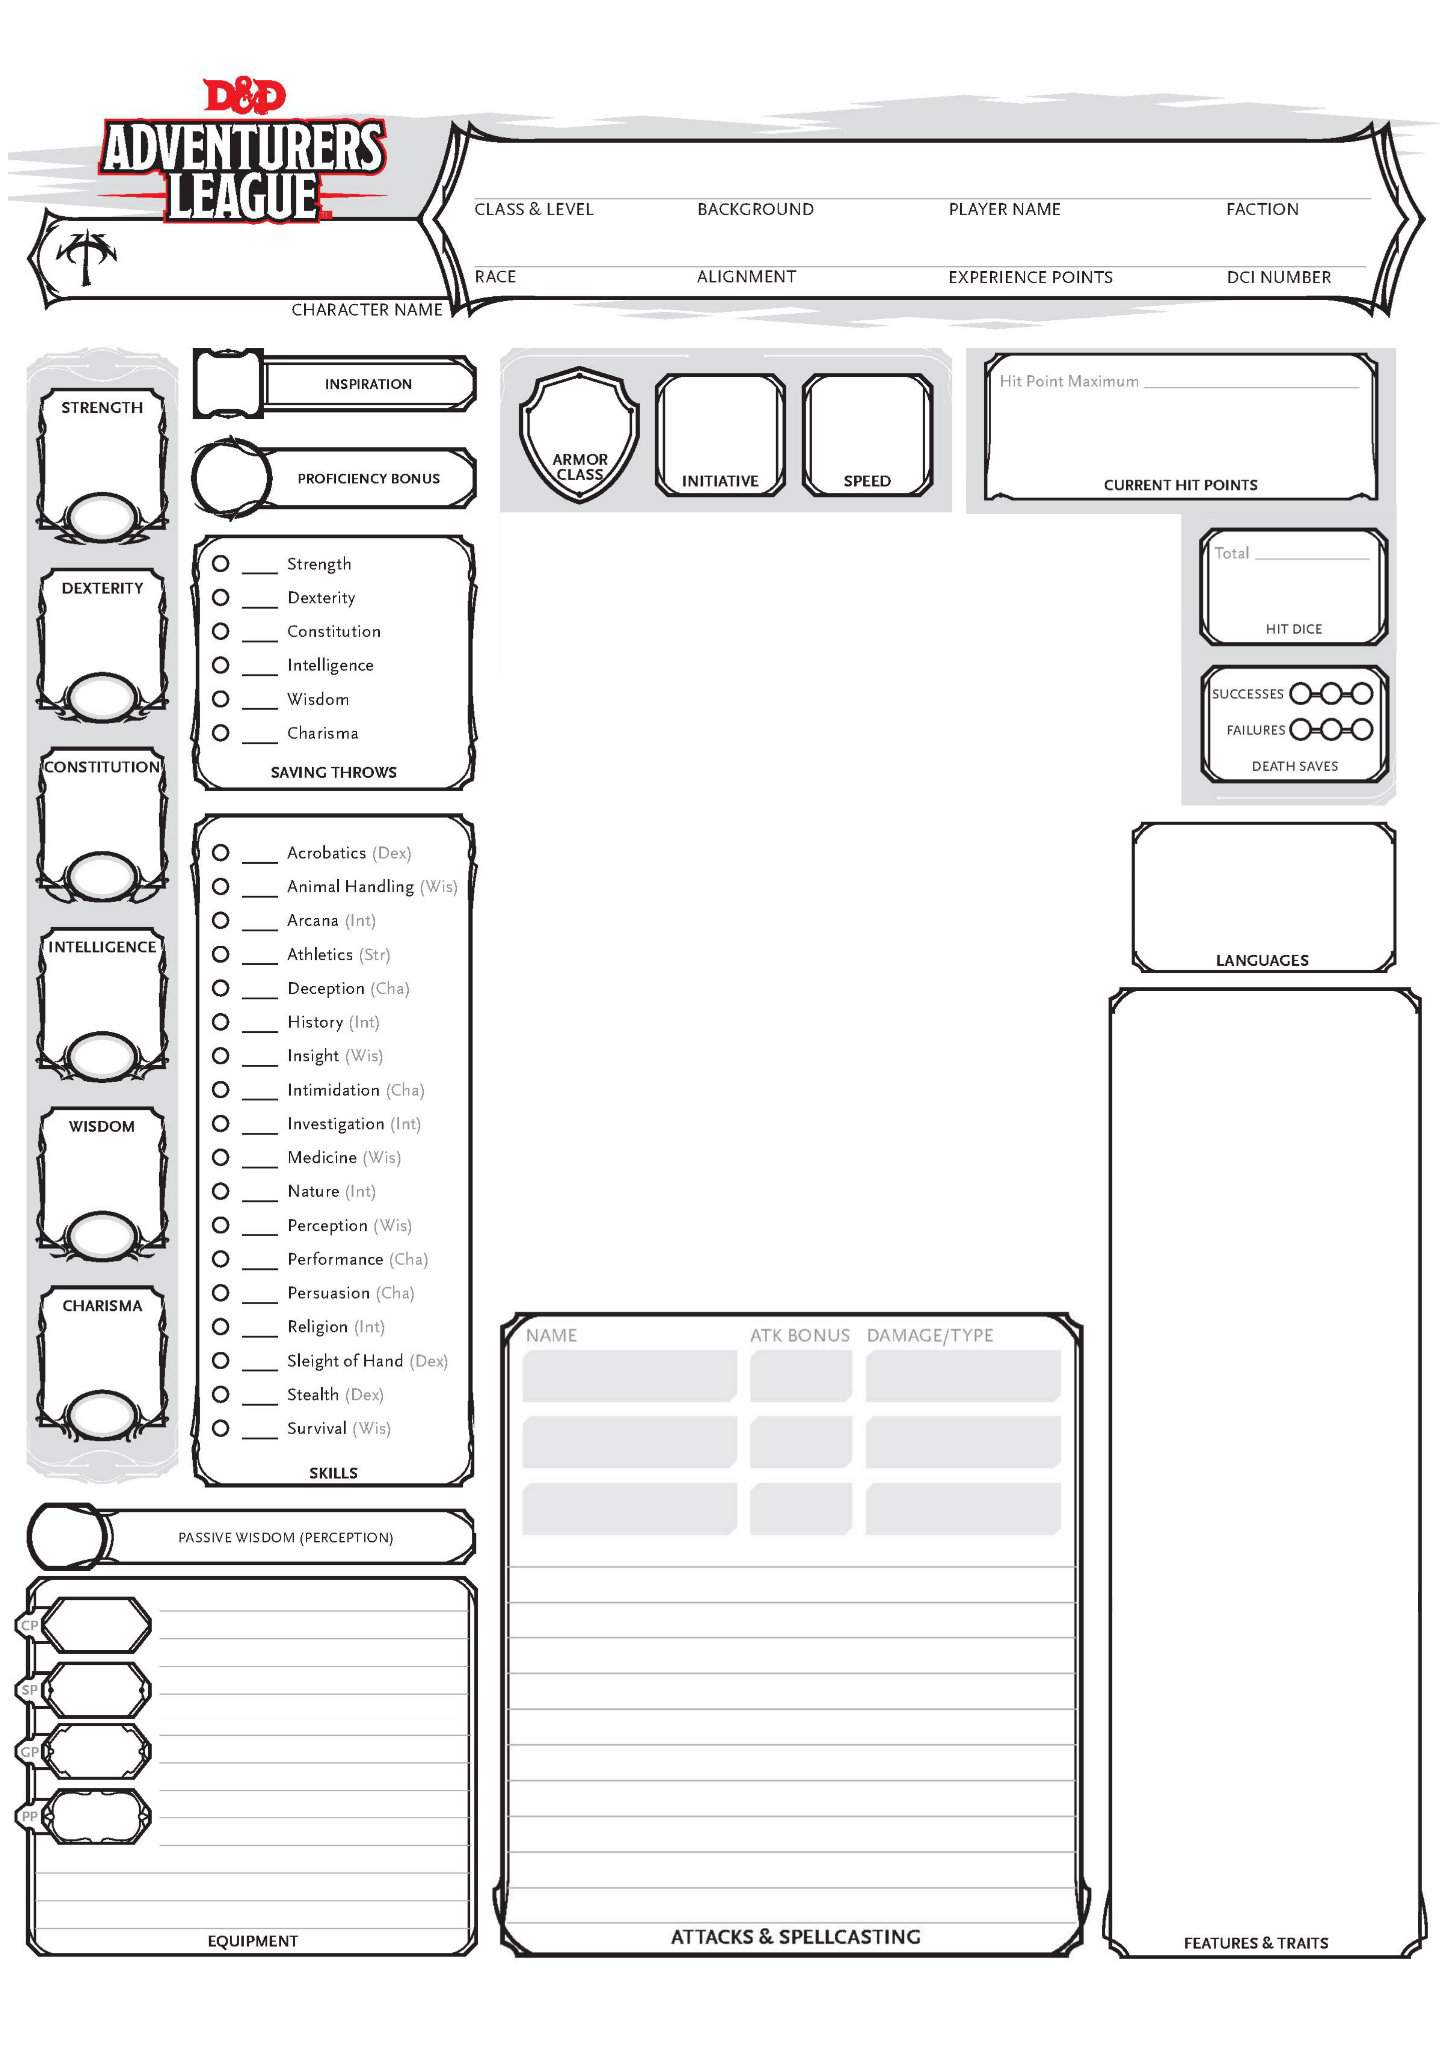 Dnd Character Sheet Character Sheet Character Sheet Template Images